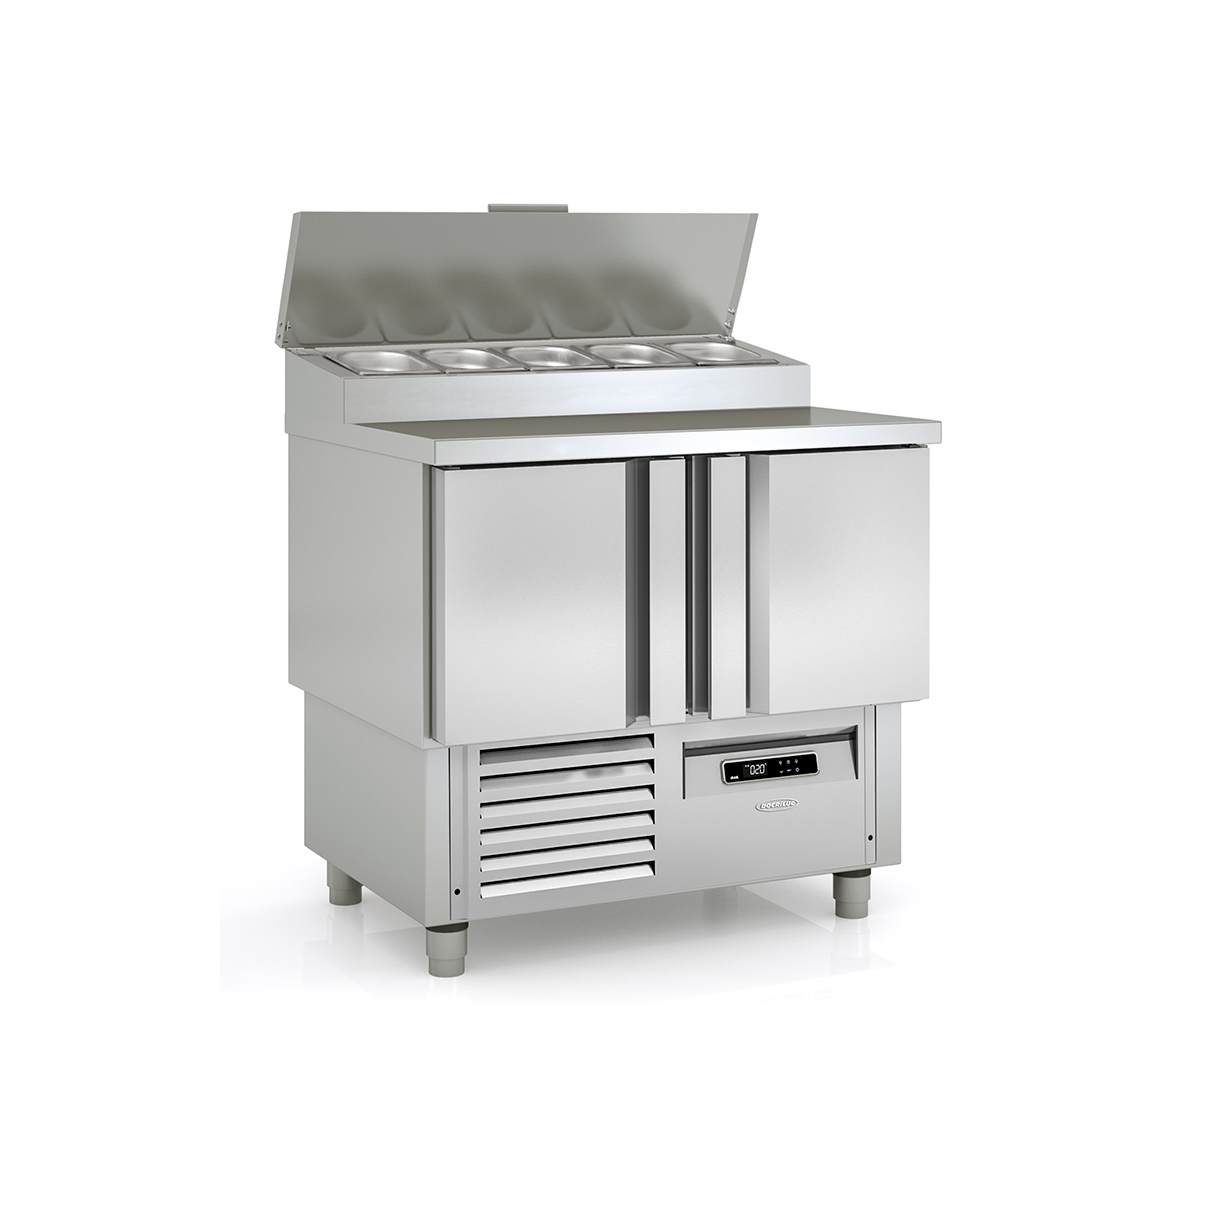 Grastronorm 1/1 Compact Refrigerated Food Preparation Table MEI-70